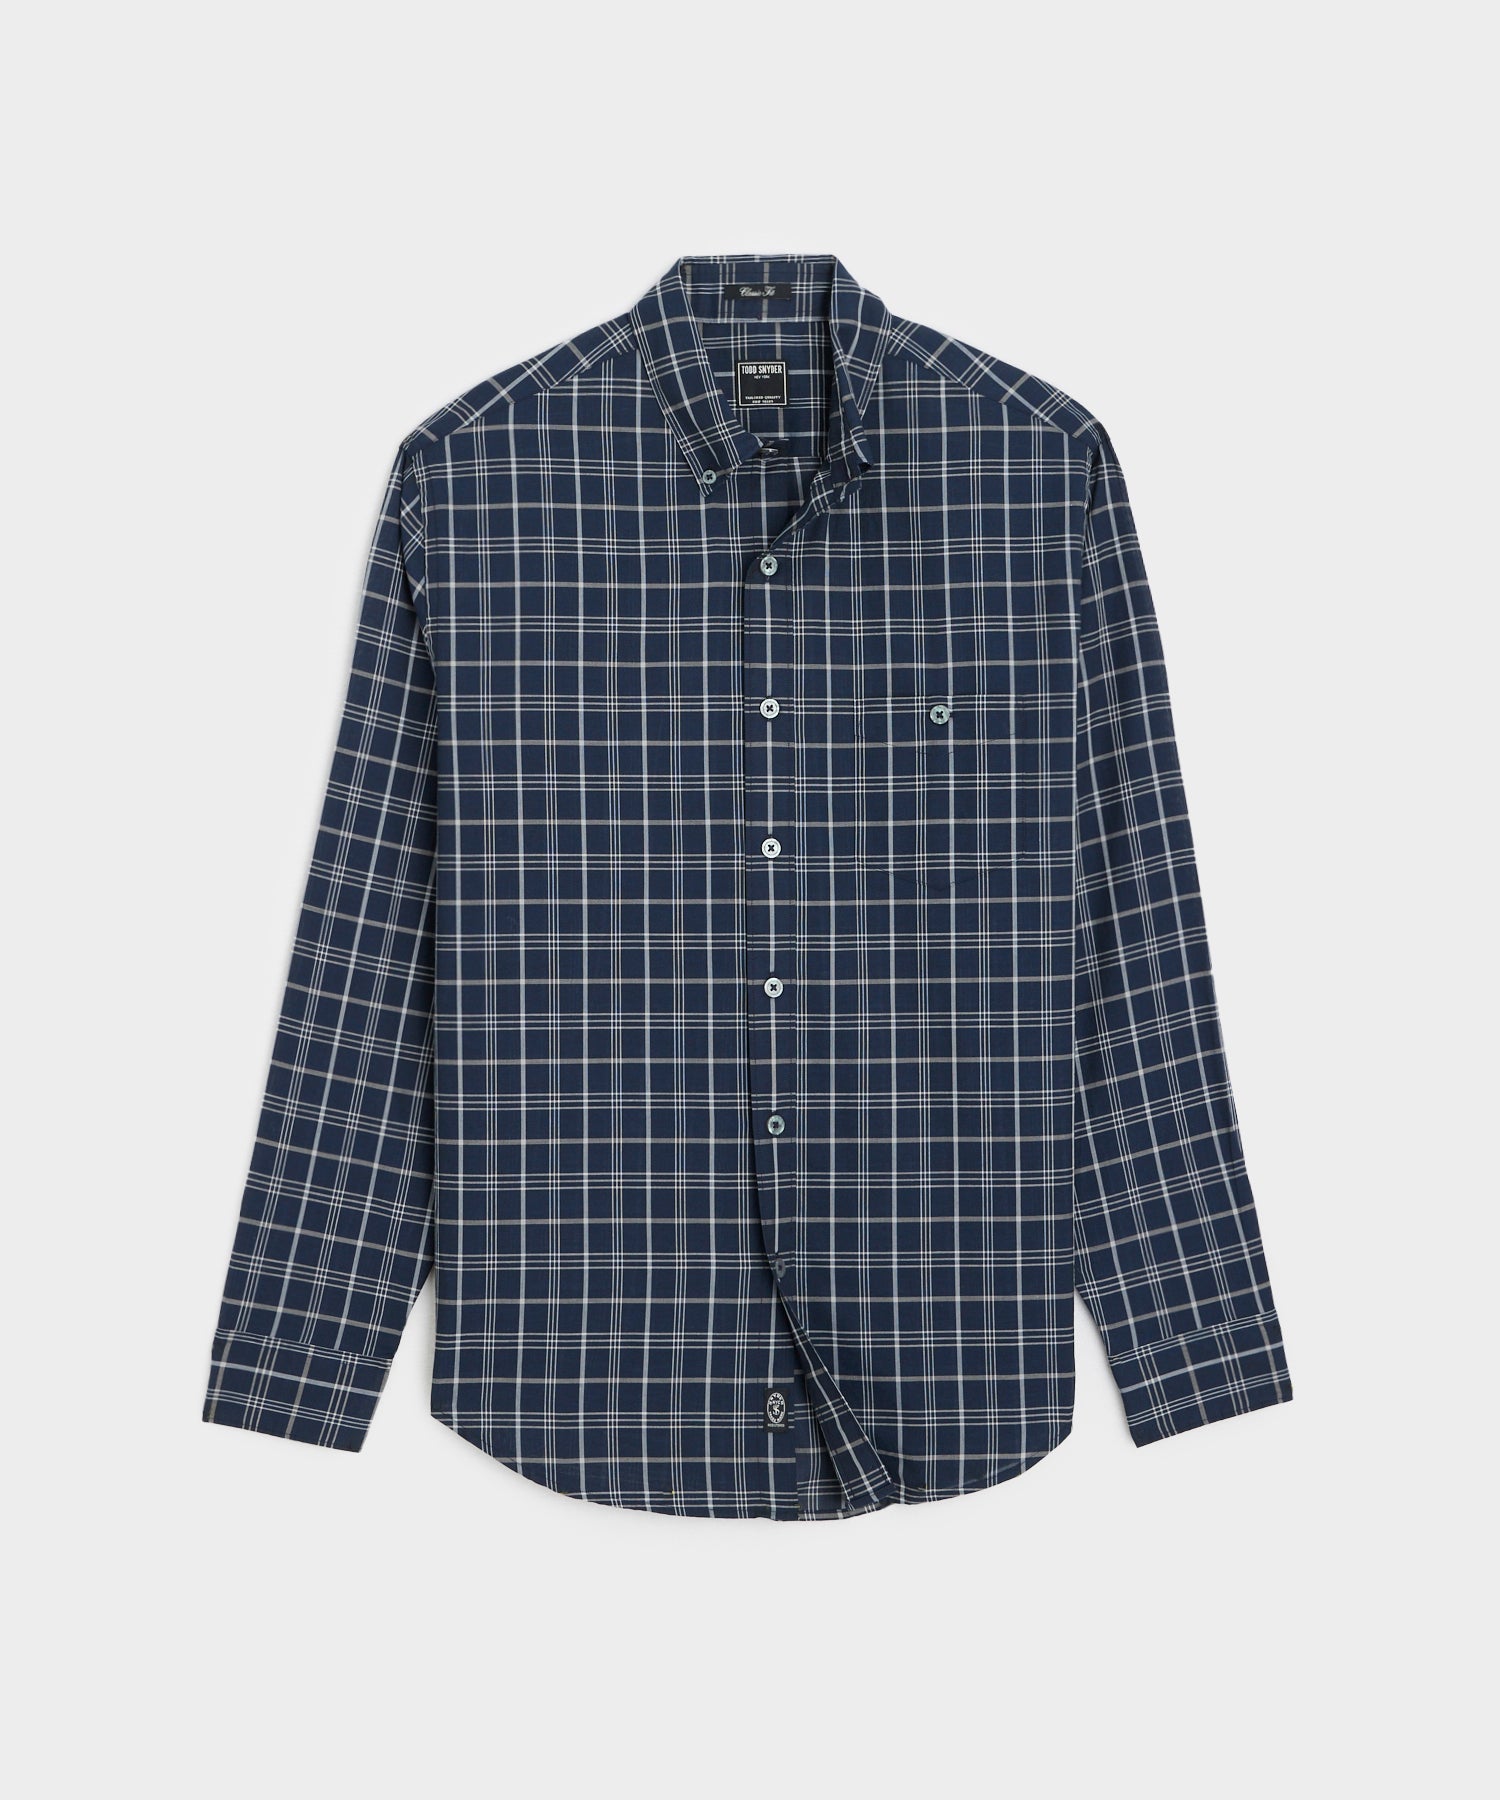 CLASSIC FIT SUMMERWEIGHT FAVORITE SHIRT IN NAVY PLAID